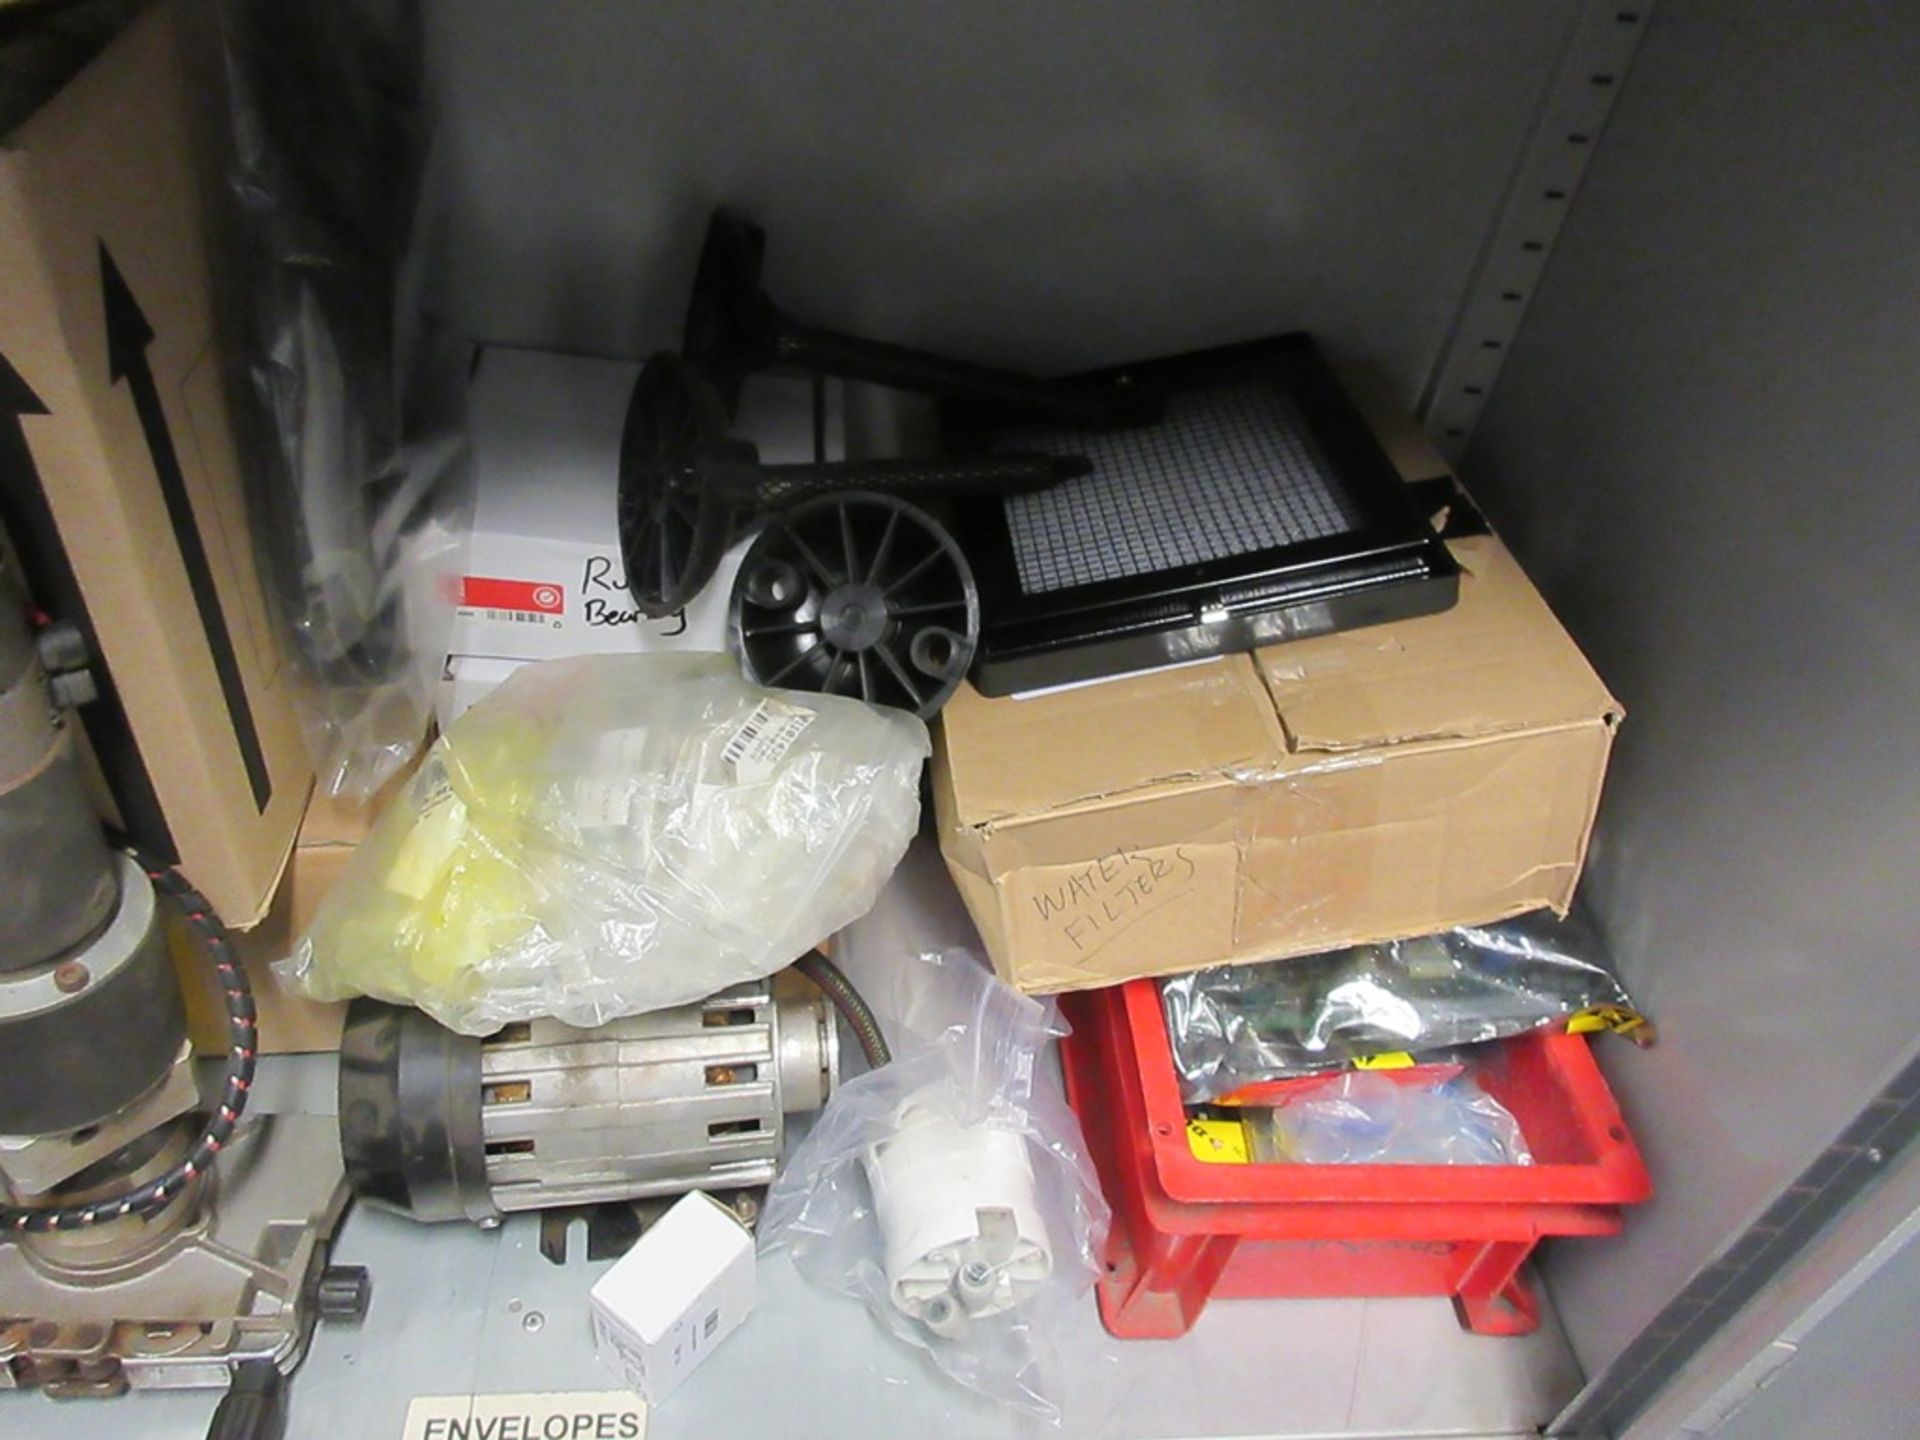 Cupboard and contents including gas regulators, power supply units, electrode connectors, janes, - Image 7 of 9